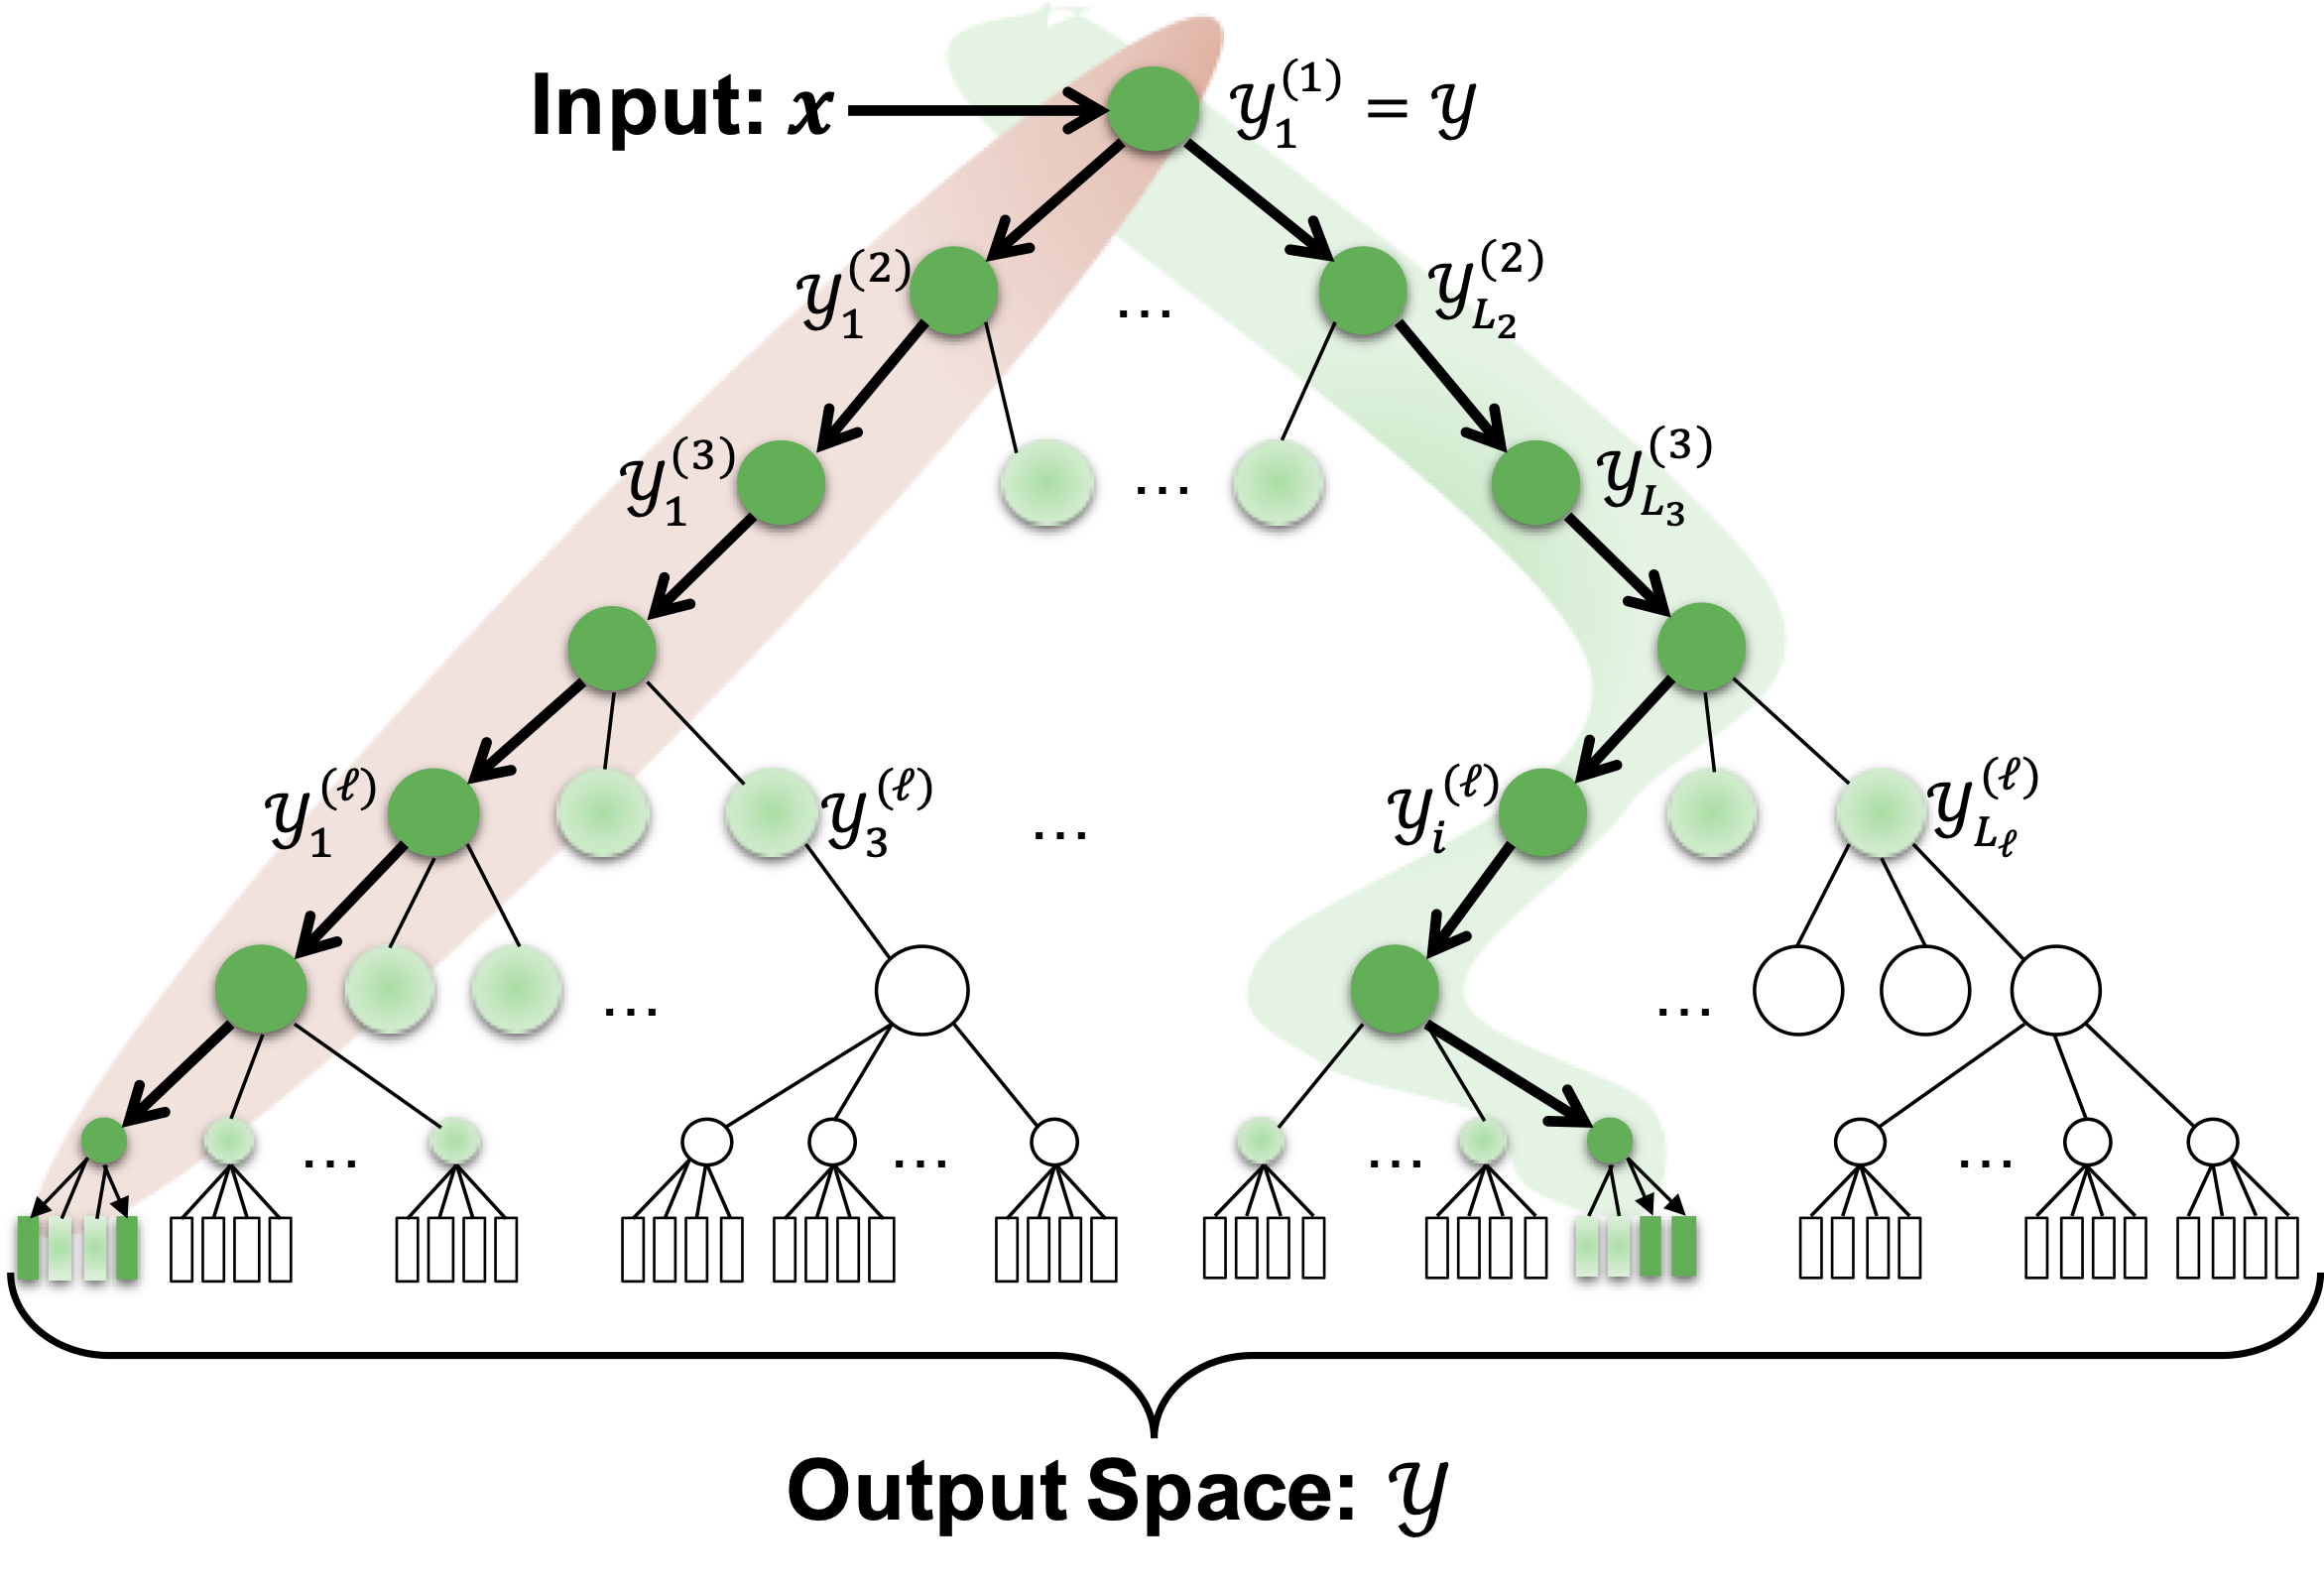 Cover Image for Paper: Accelerating Inference for Sparse XMR Trees